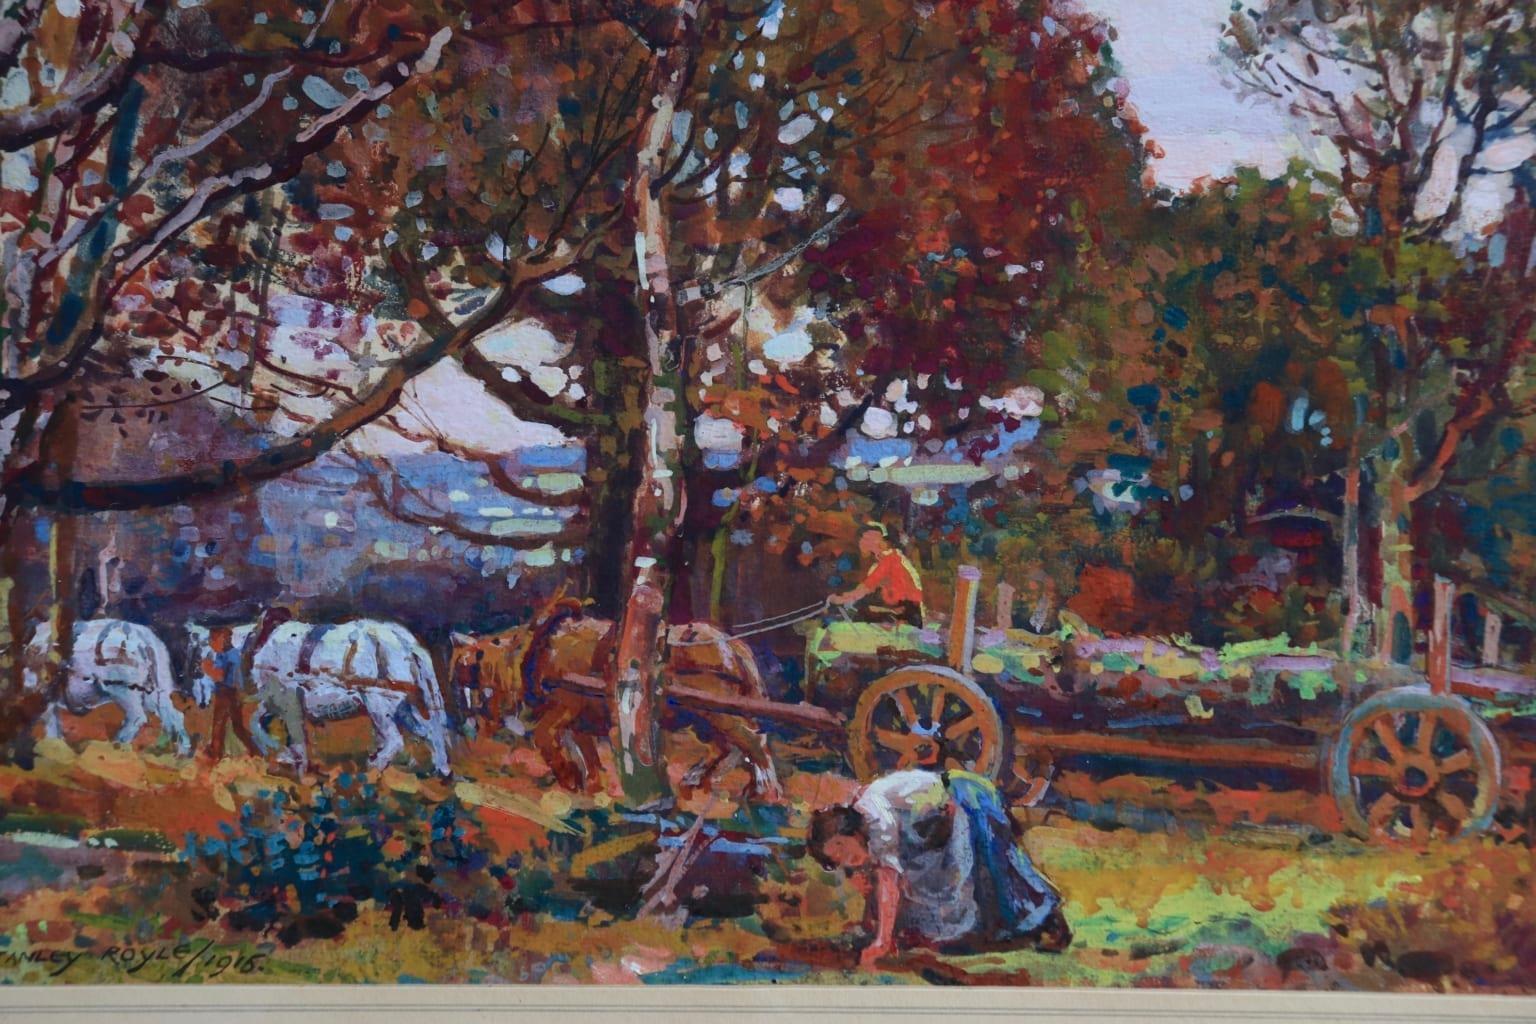 A beautiful and colourful gouache on board by English Post-Impressionist painter Stanley Royle, depicting workers with horse and carts collecting logs on an autumn day in the Yorkshire Dales. Signed and dated 1916 lower left.

Dimensions:
Unframed: